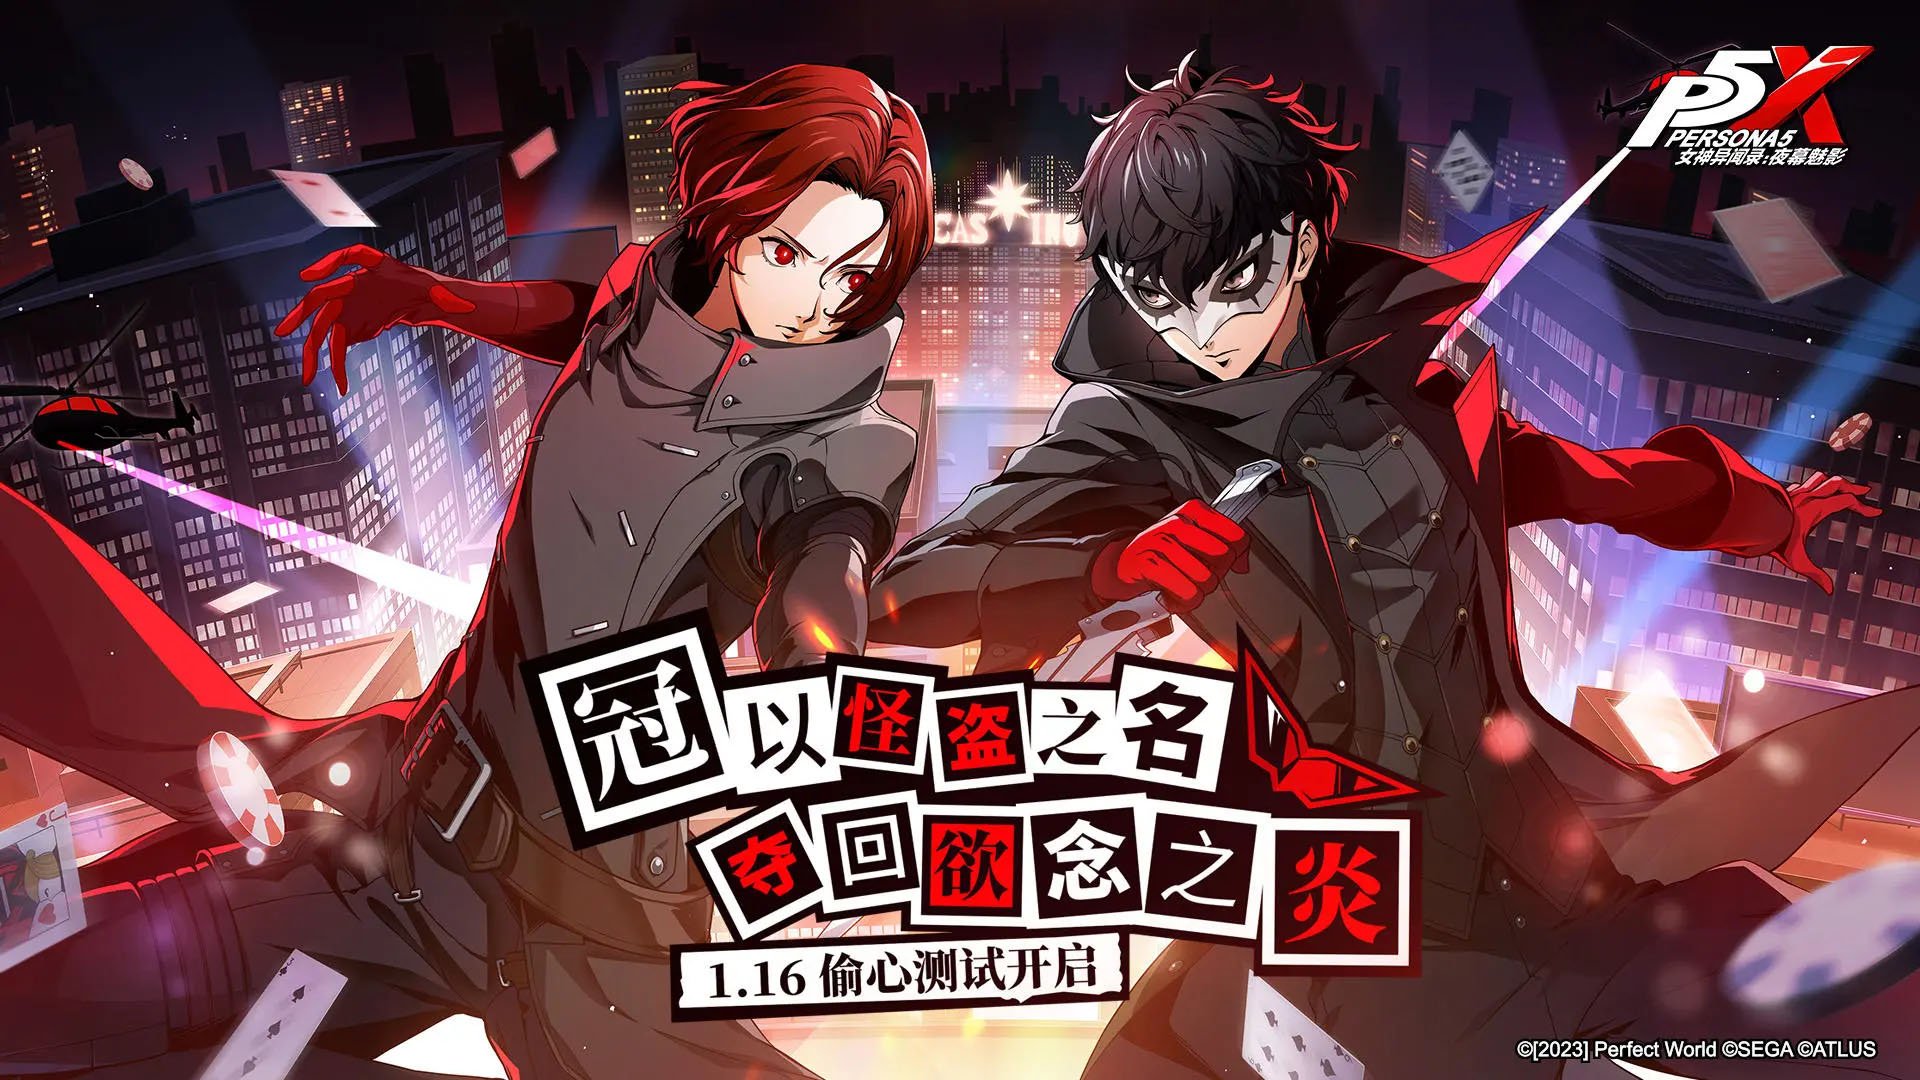 Persona 5: The Phantom X ‘Heart Stealing Test’ begins January 16 in China